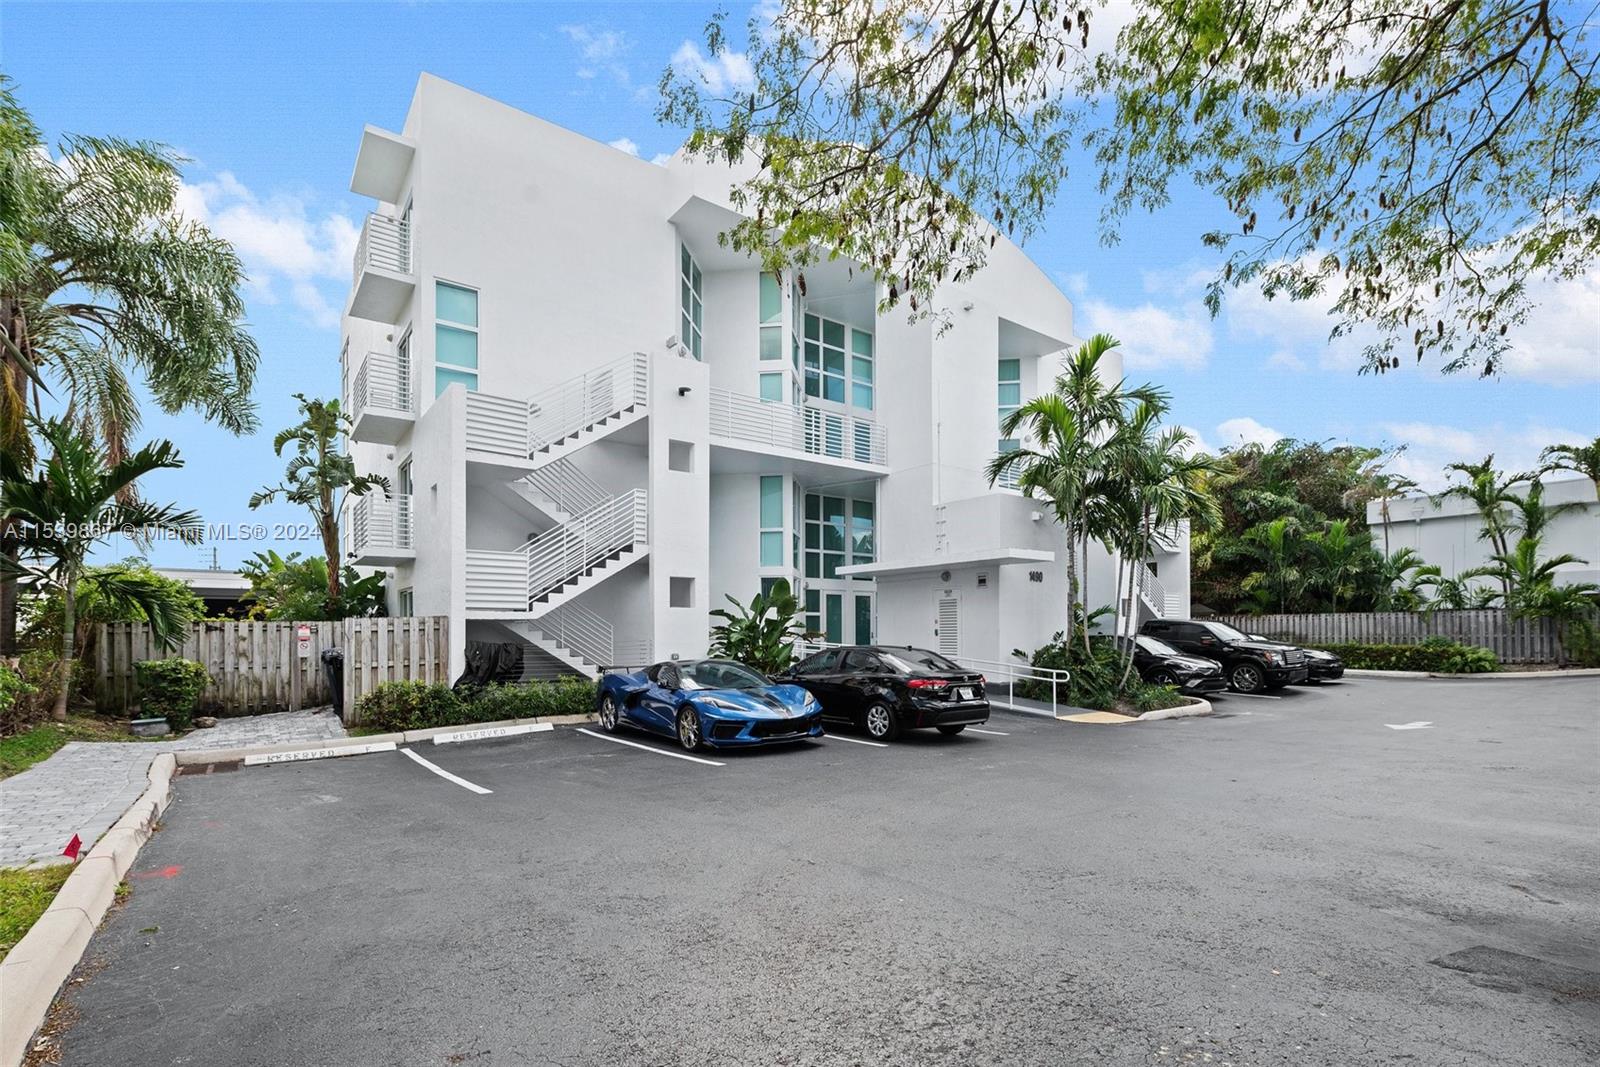 1490 Se 15th St St 201, Fort Lauderdale, Broward County, Florida - 2 Bedrooms  
2 Bathrooms - 